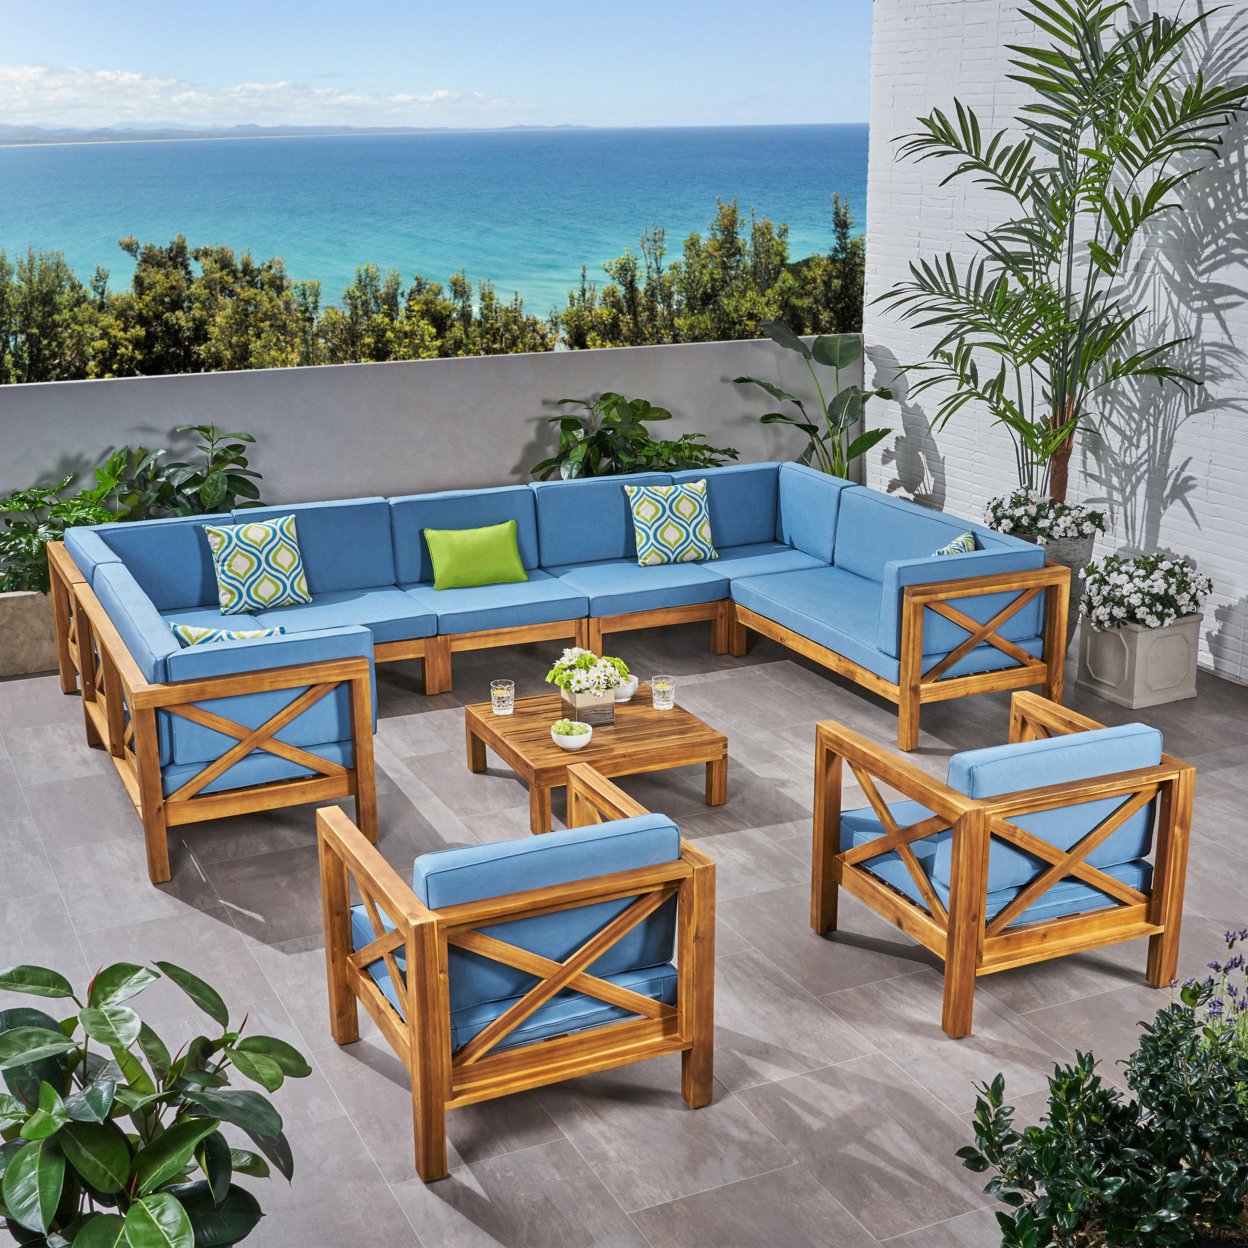 Isabella Outdoor 11 Seater Acacia Wood Sectional Sofa And Club Chair Set - Teak Finish + Blue